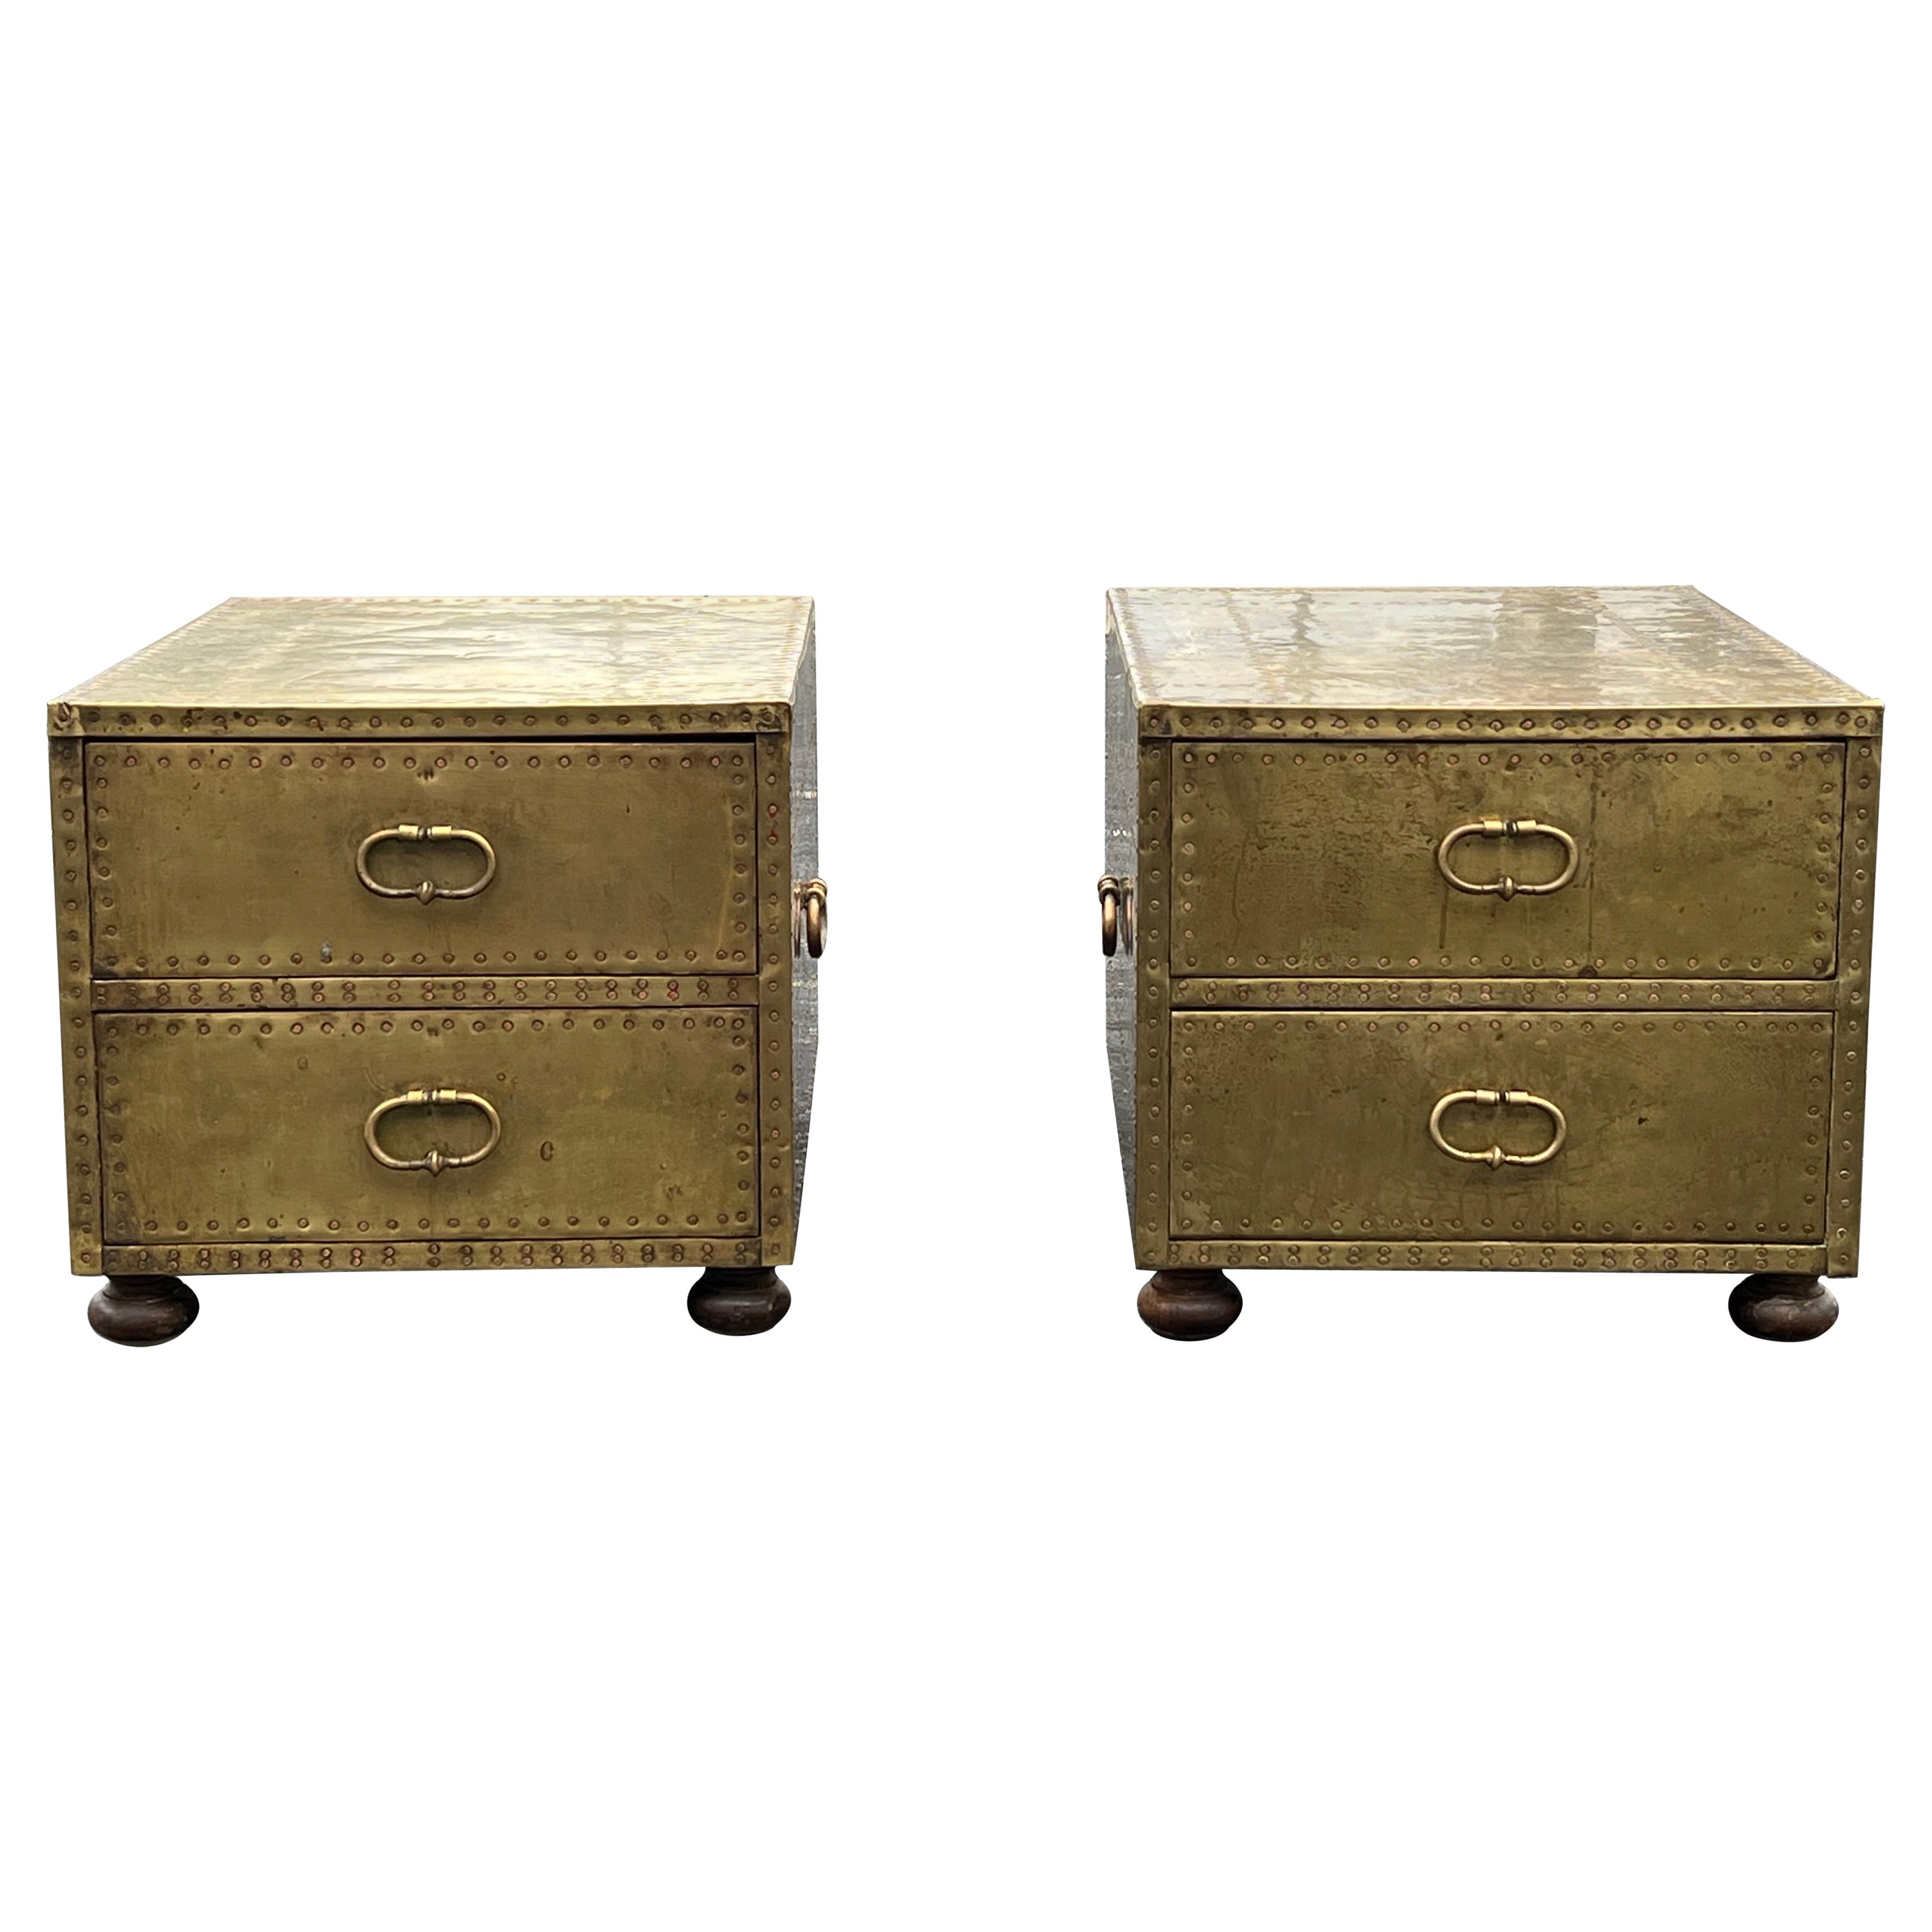 A Pair of Studded Brass Sarreid Dressers Campaign Style